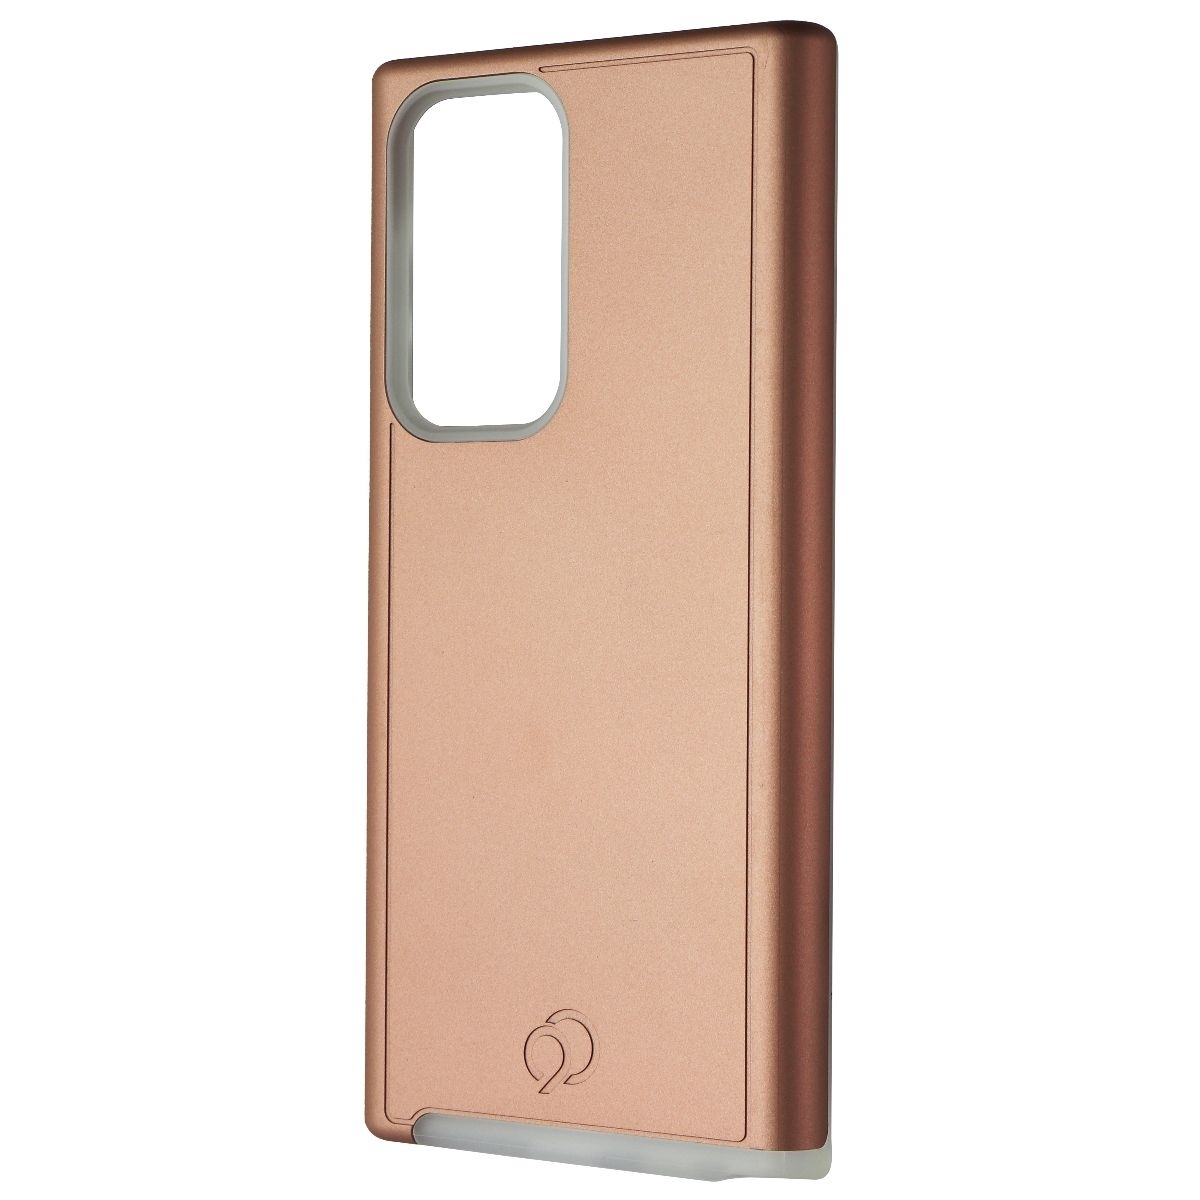 Nimbus9 Cirrus 2 Series Case For Samsung Galaxy S22 Ultra 5G - Rose Gold/Frost (Refurbished)